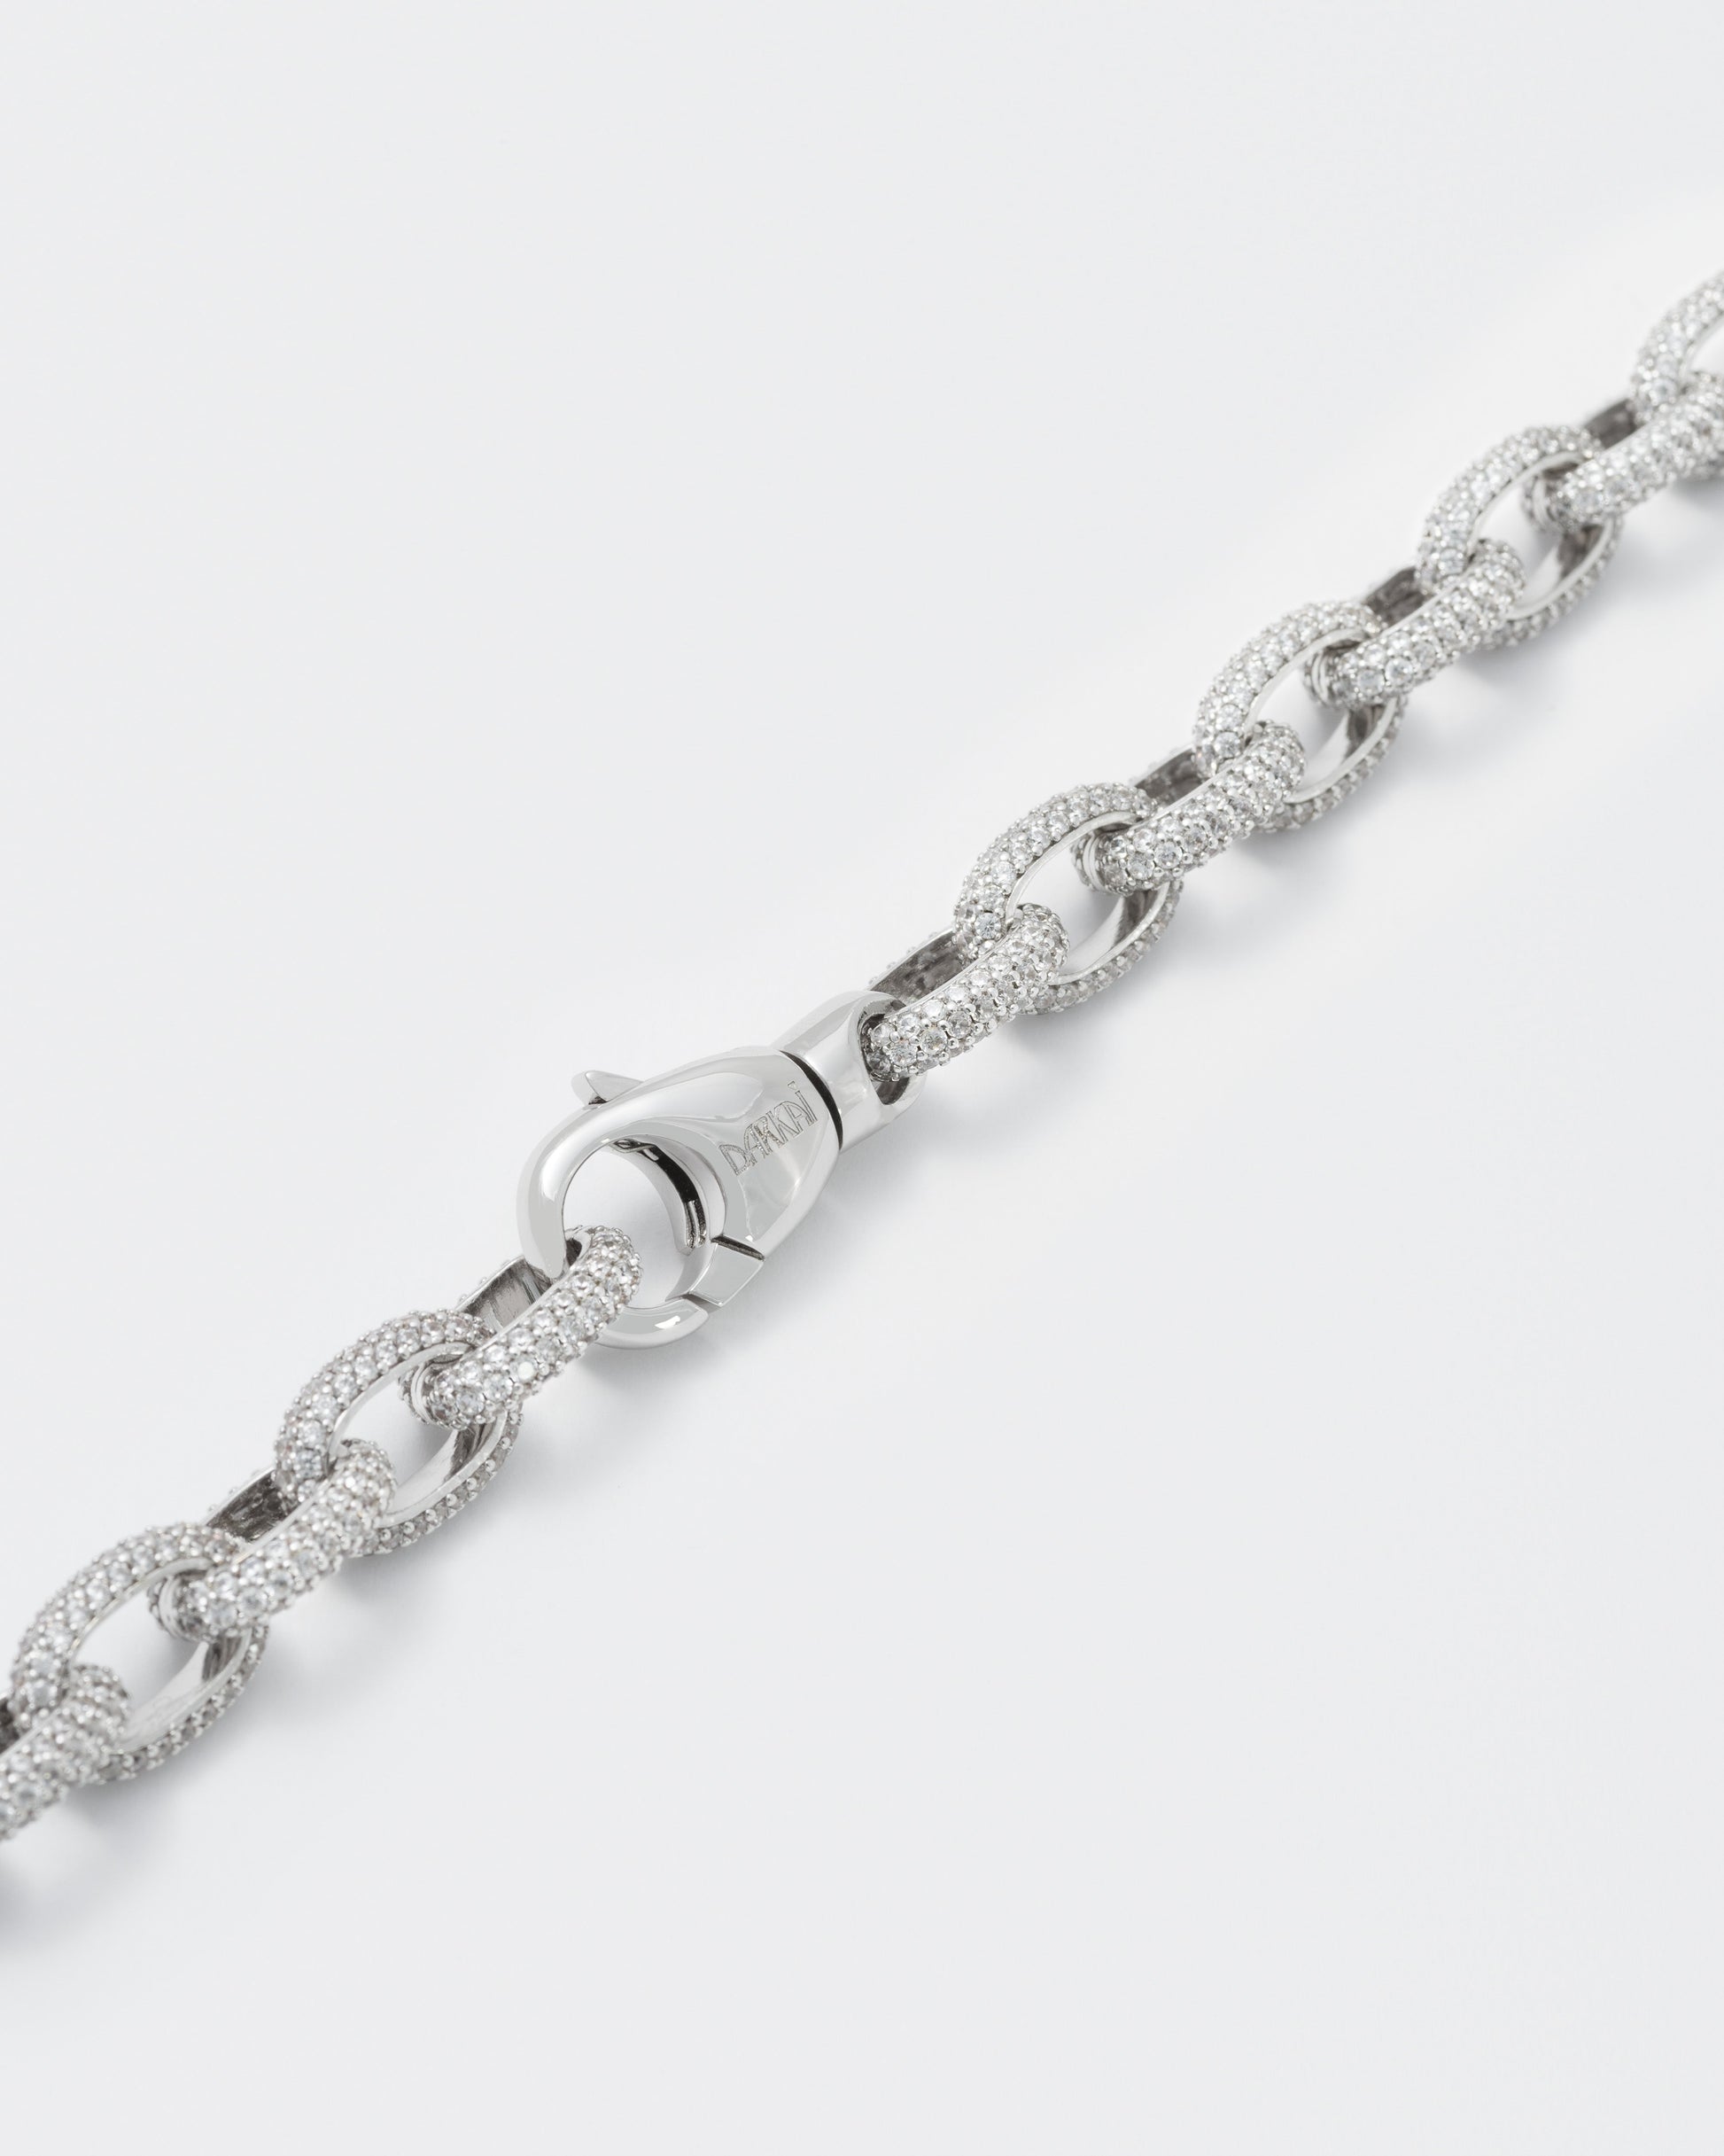 detail of 18k white gold coated rolo chain necklace with all-around hand-set micropavé stones in white